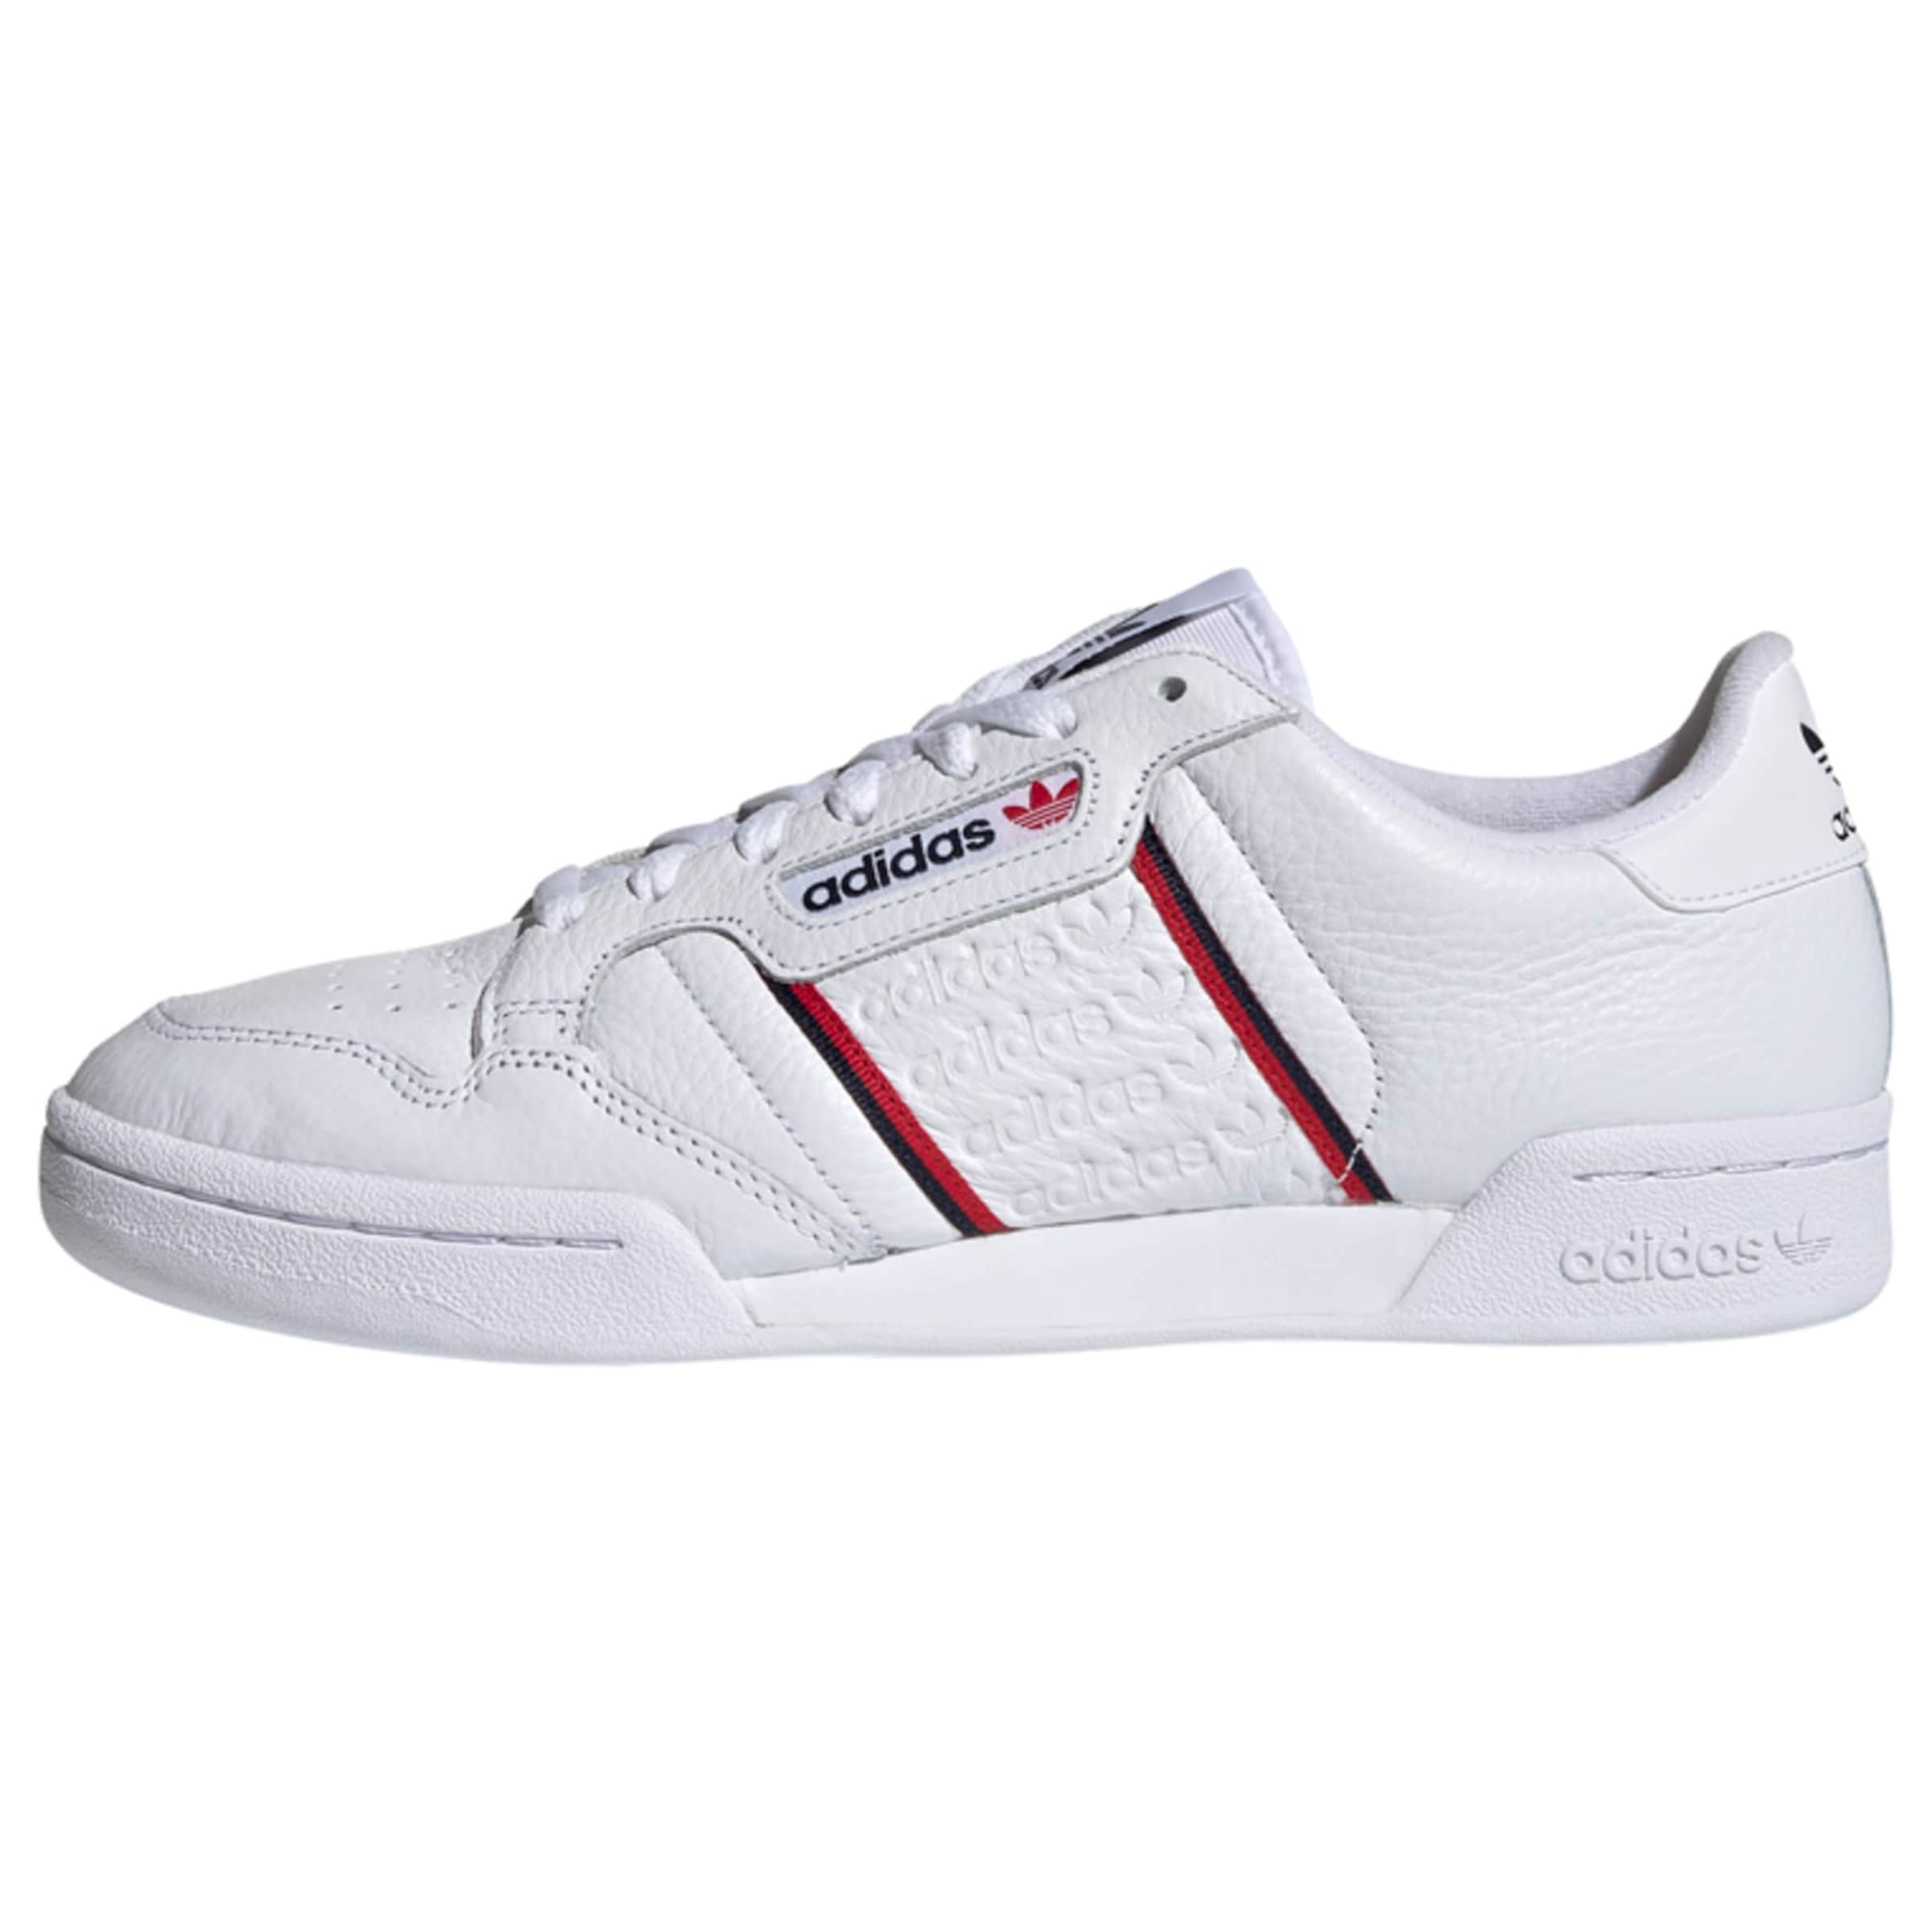 adidas originals continental 80 in white and red